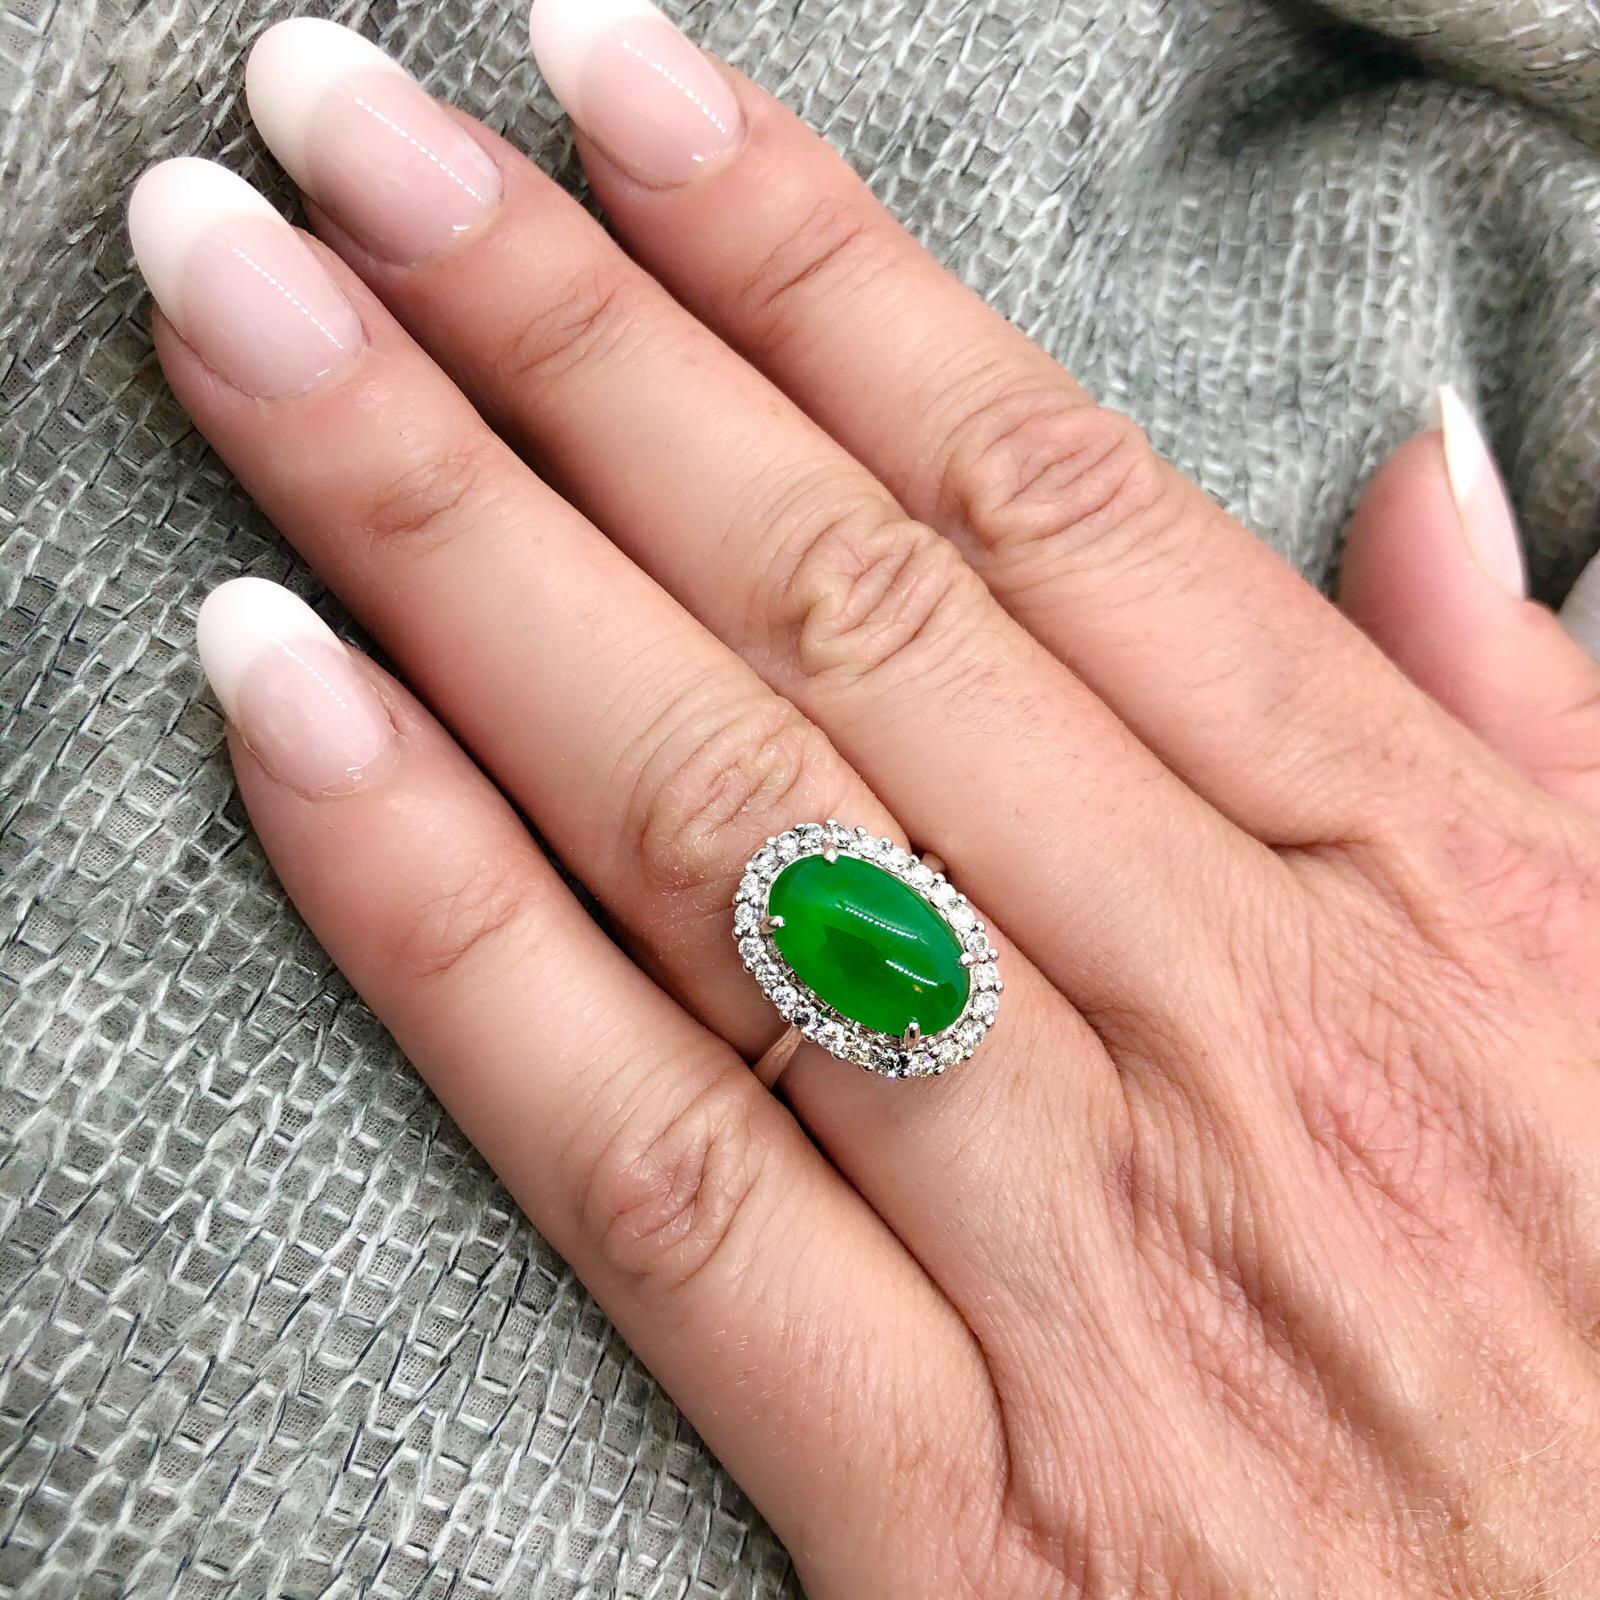 Estate 14Kt White Gold Oval Double Cabochon Cut Jade Ring set with 24 Round Brilliant Cut Diamonds for approximately 1ct. The total weight of the ring is 6.4 grams and is a size 6.75. Jade is natural with no indications of impregnation and GIA